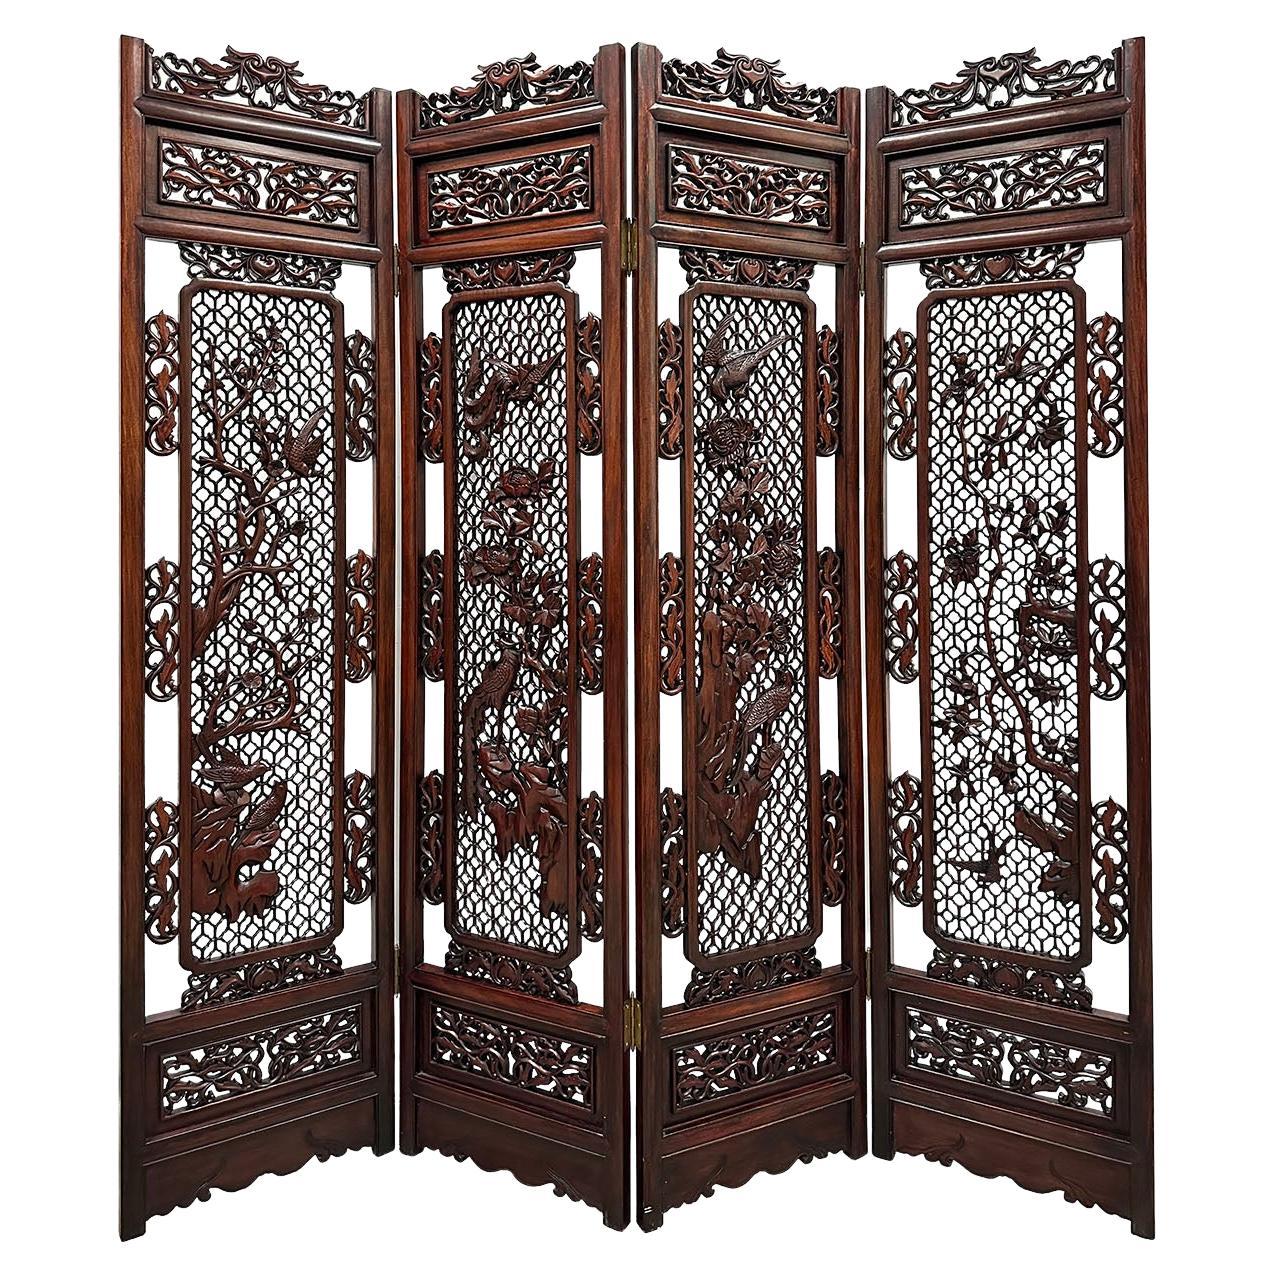 Mid-20th Century Chinese Rosewood Open Carved Screen/Room Divider For Sale